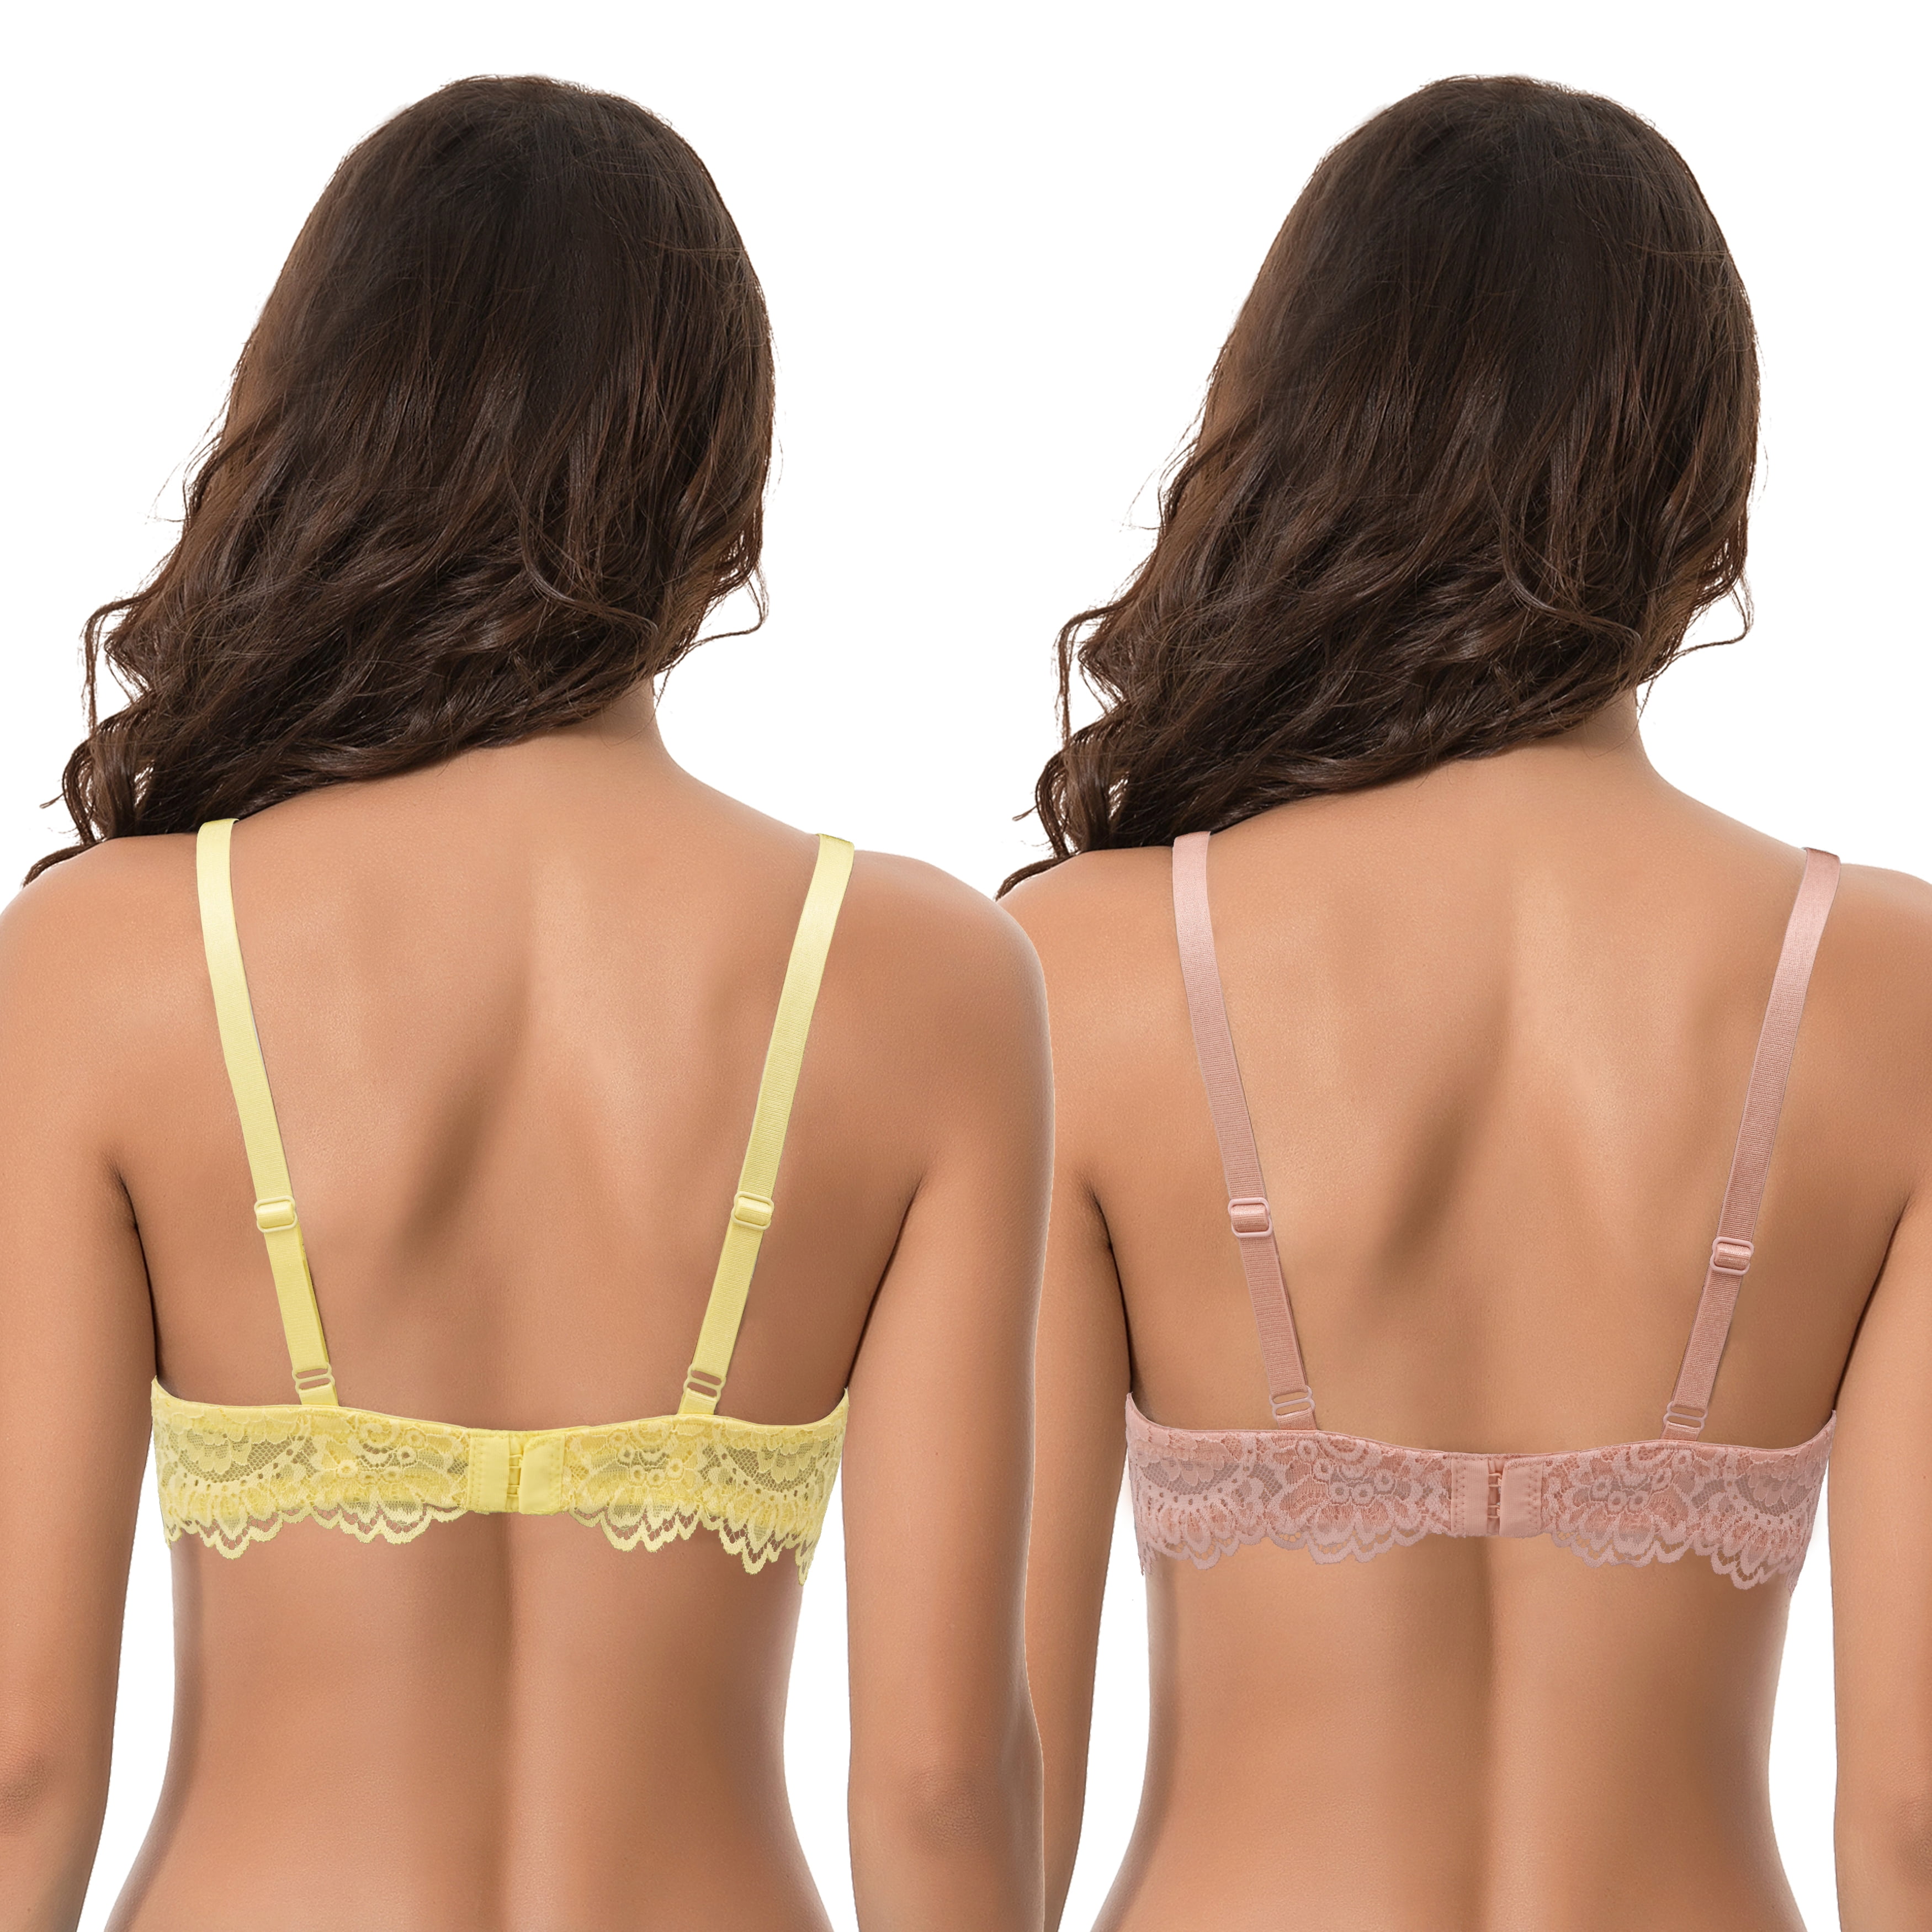 Curve Muse Women's Underwire Plus Size Push Up Add 1 and a Half Cup Lace  Bras-2PK-Lime Cream/Hot Pink,Mauve/Rose Gold-42DD 